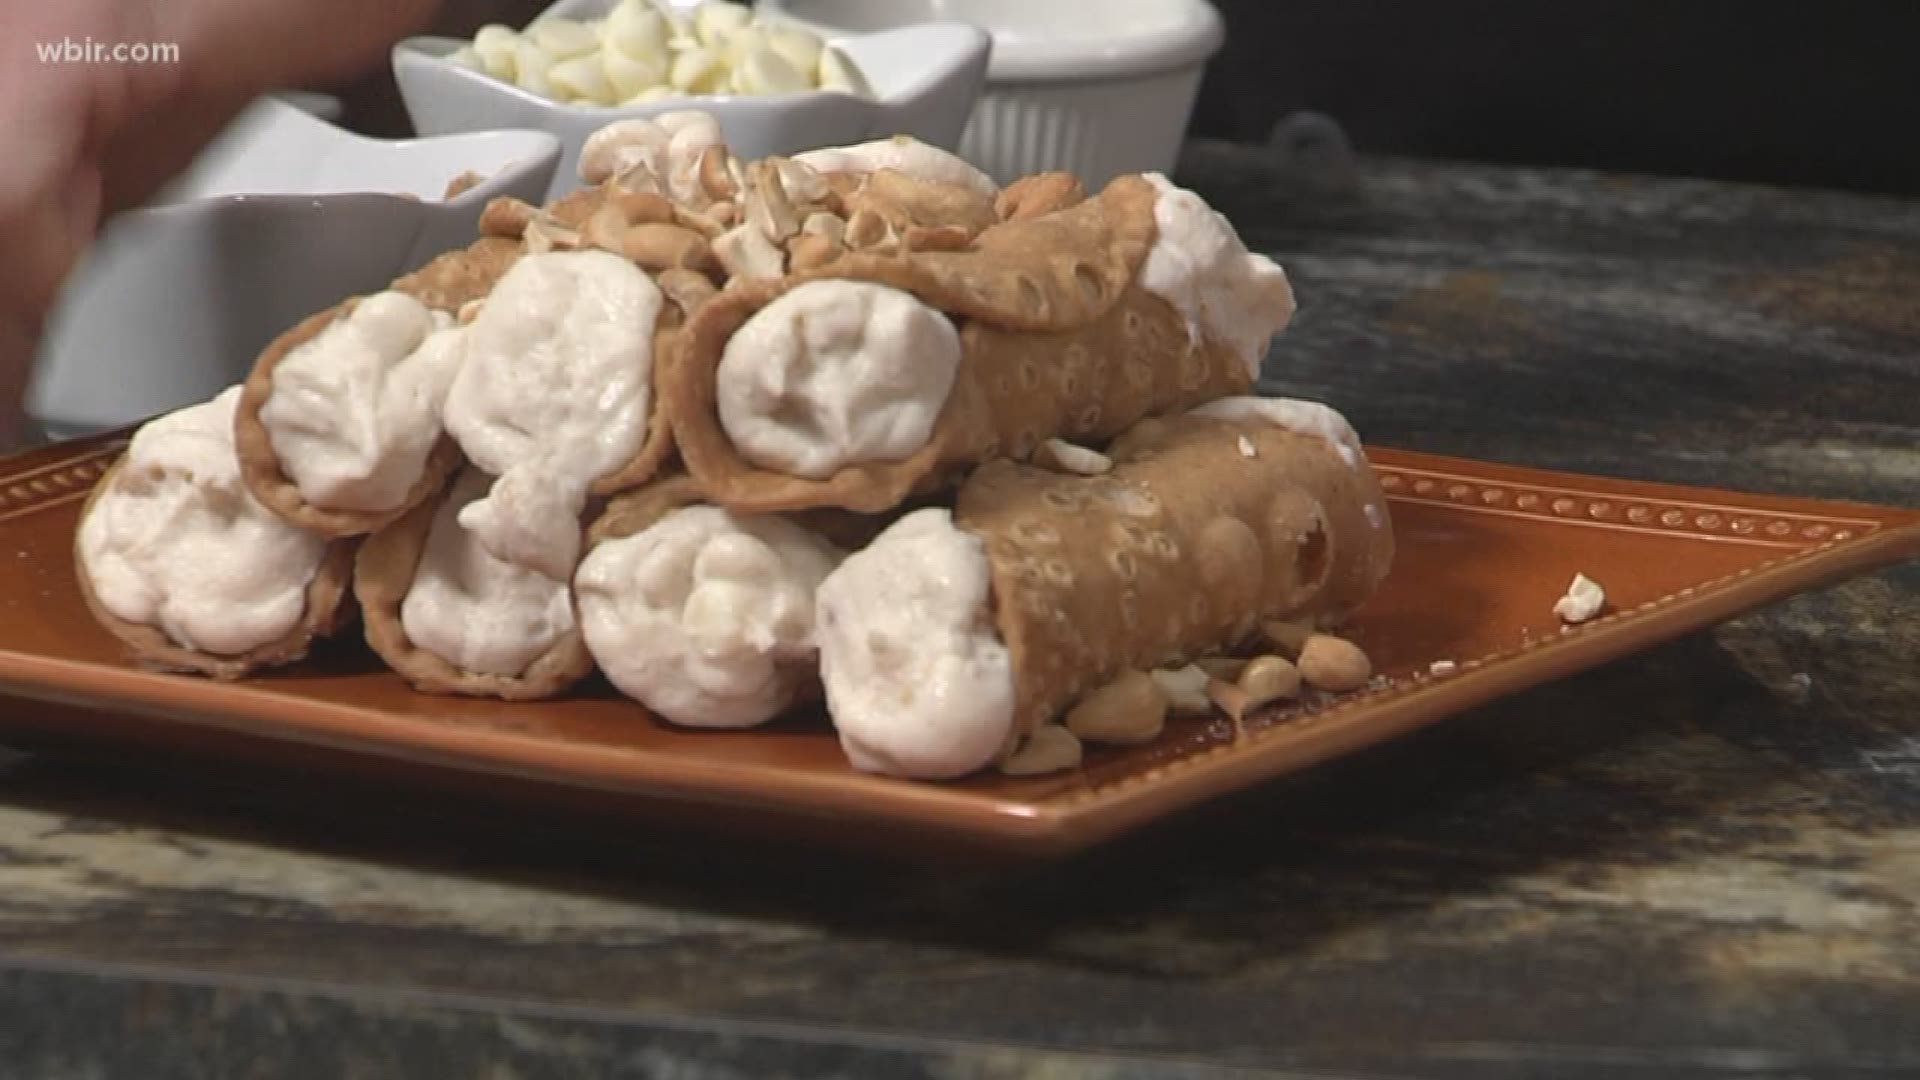 Holy canolli! Chef Gary Nicely from Naples Italian whips up a truly delicious Italian dessert.